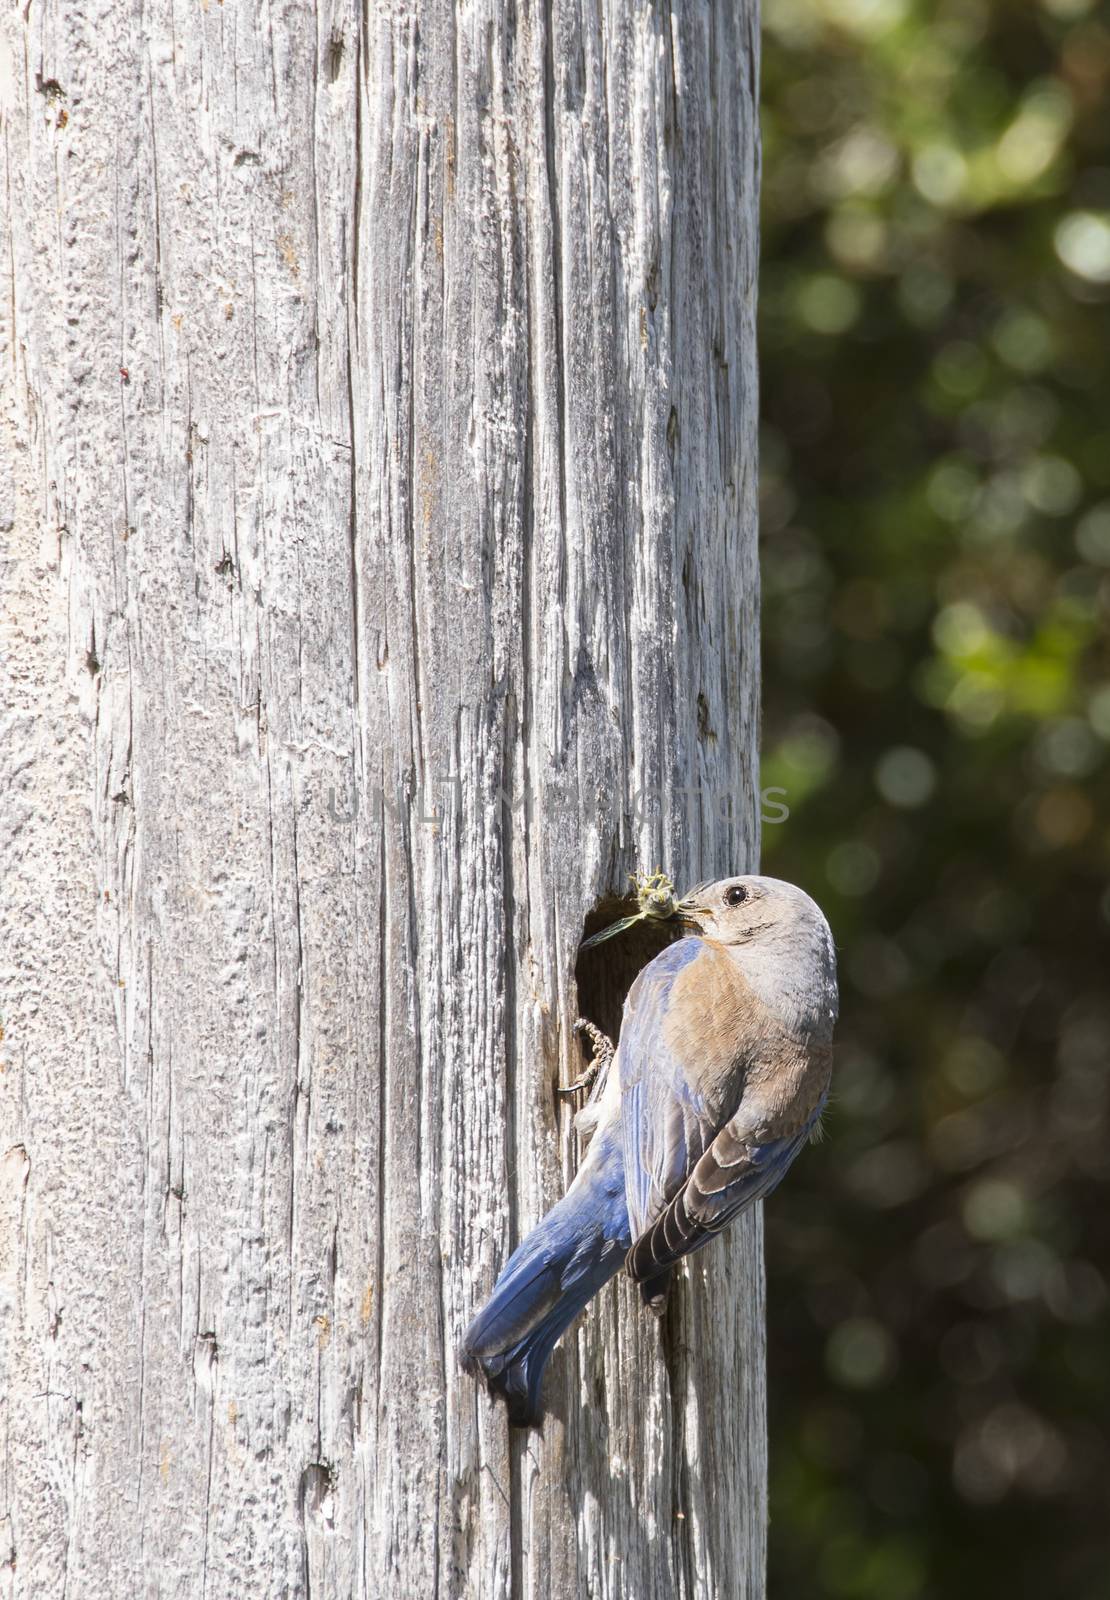 Female Weatern Bluebird getting into the nest to feed her babies with a cricket in her beak.